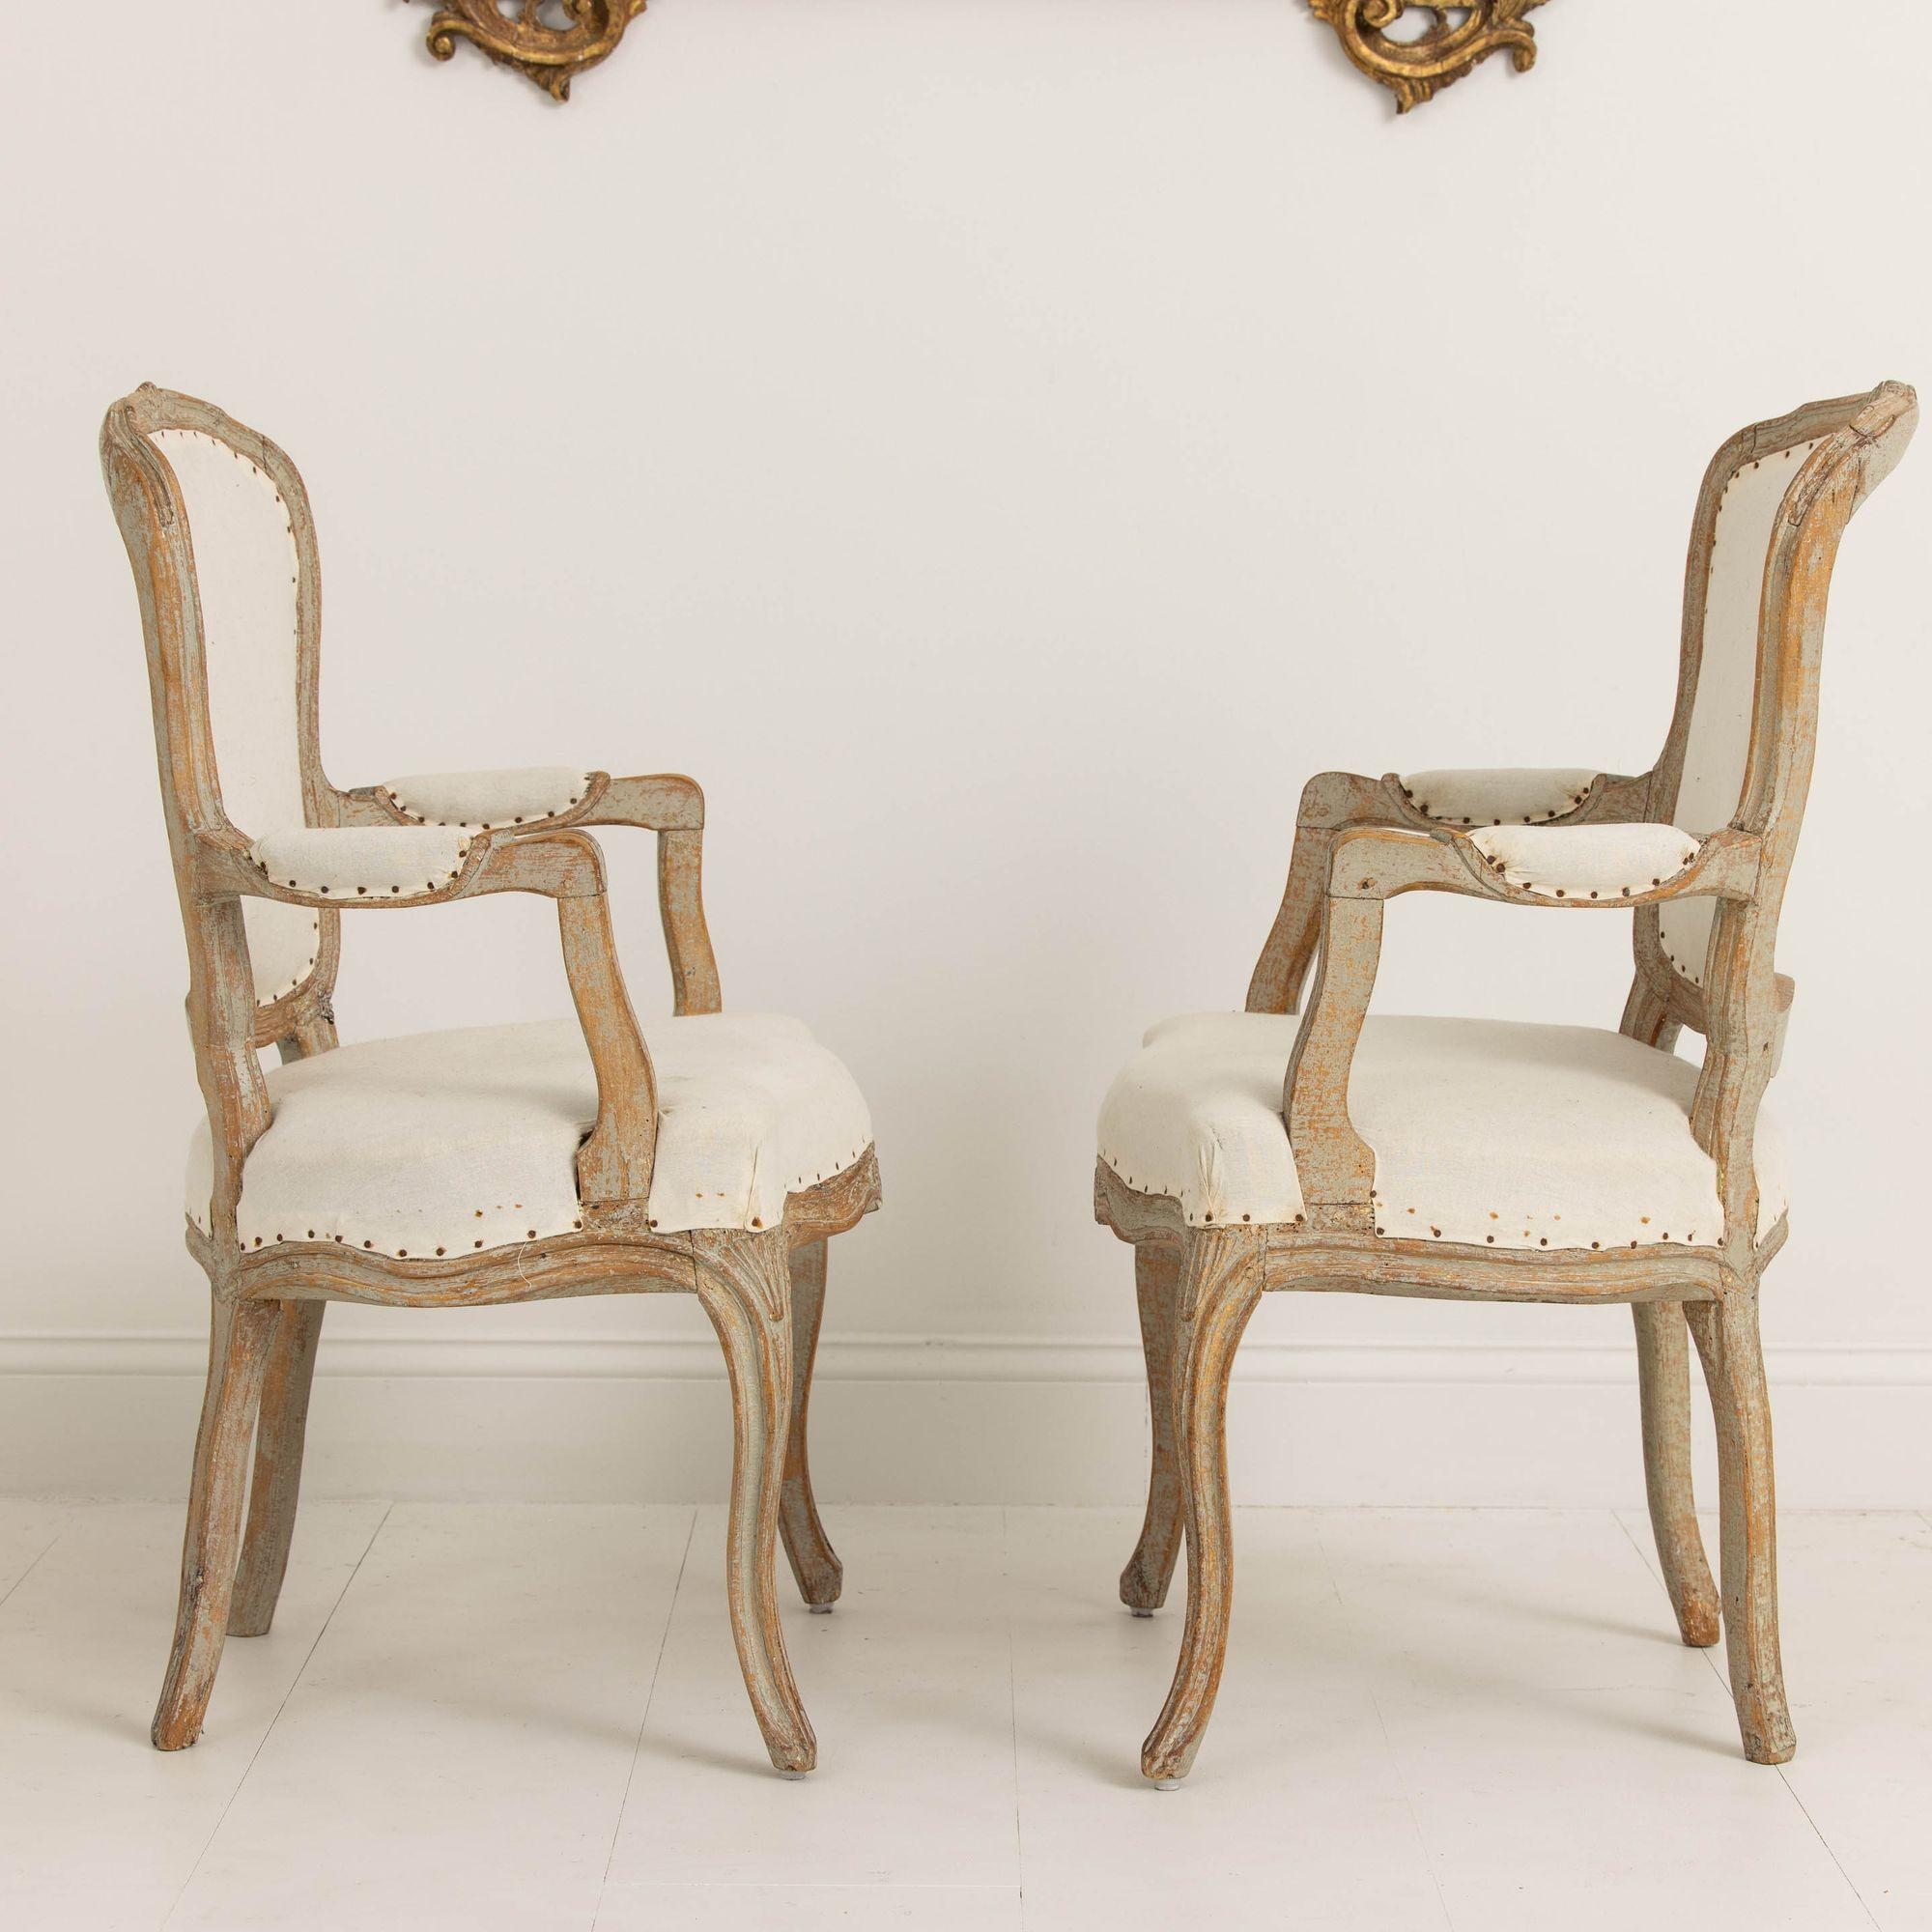 Pair of 18th c. Swedish Rococo Period Armchairs in Original Paint  For Sale 7